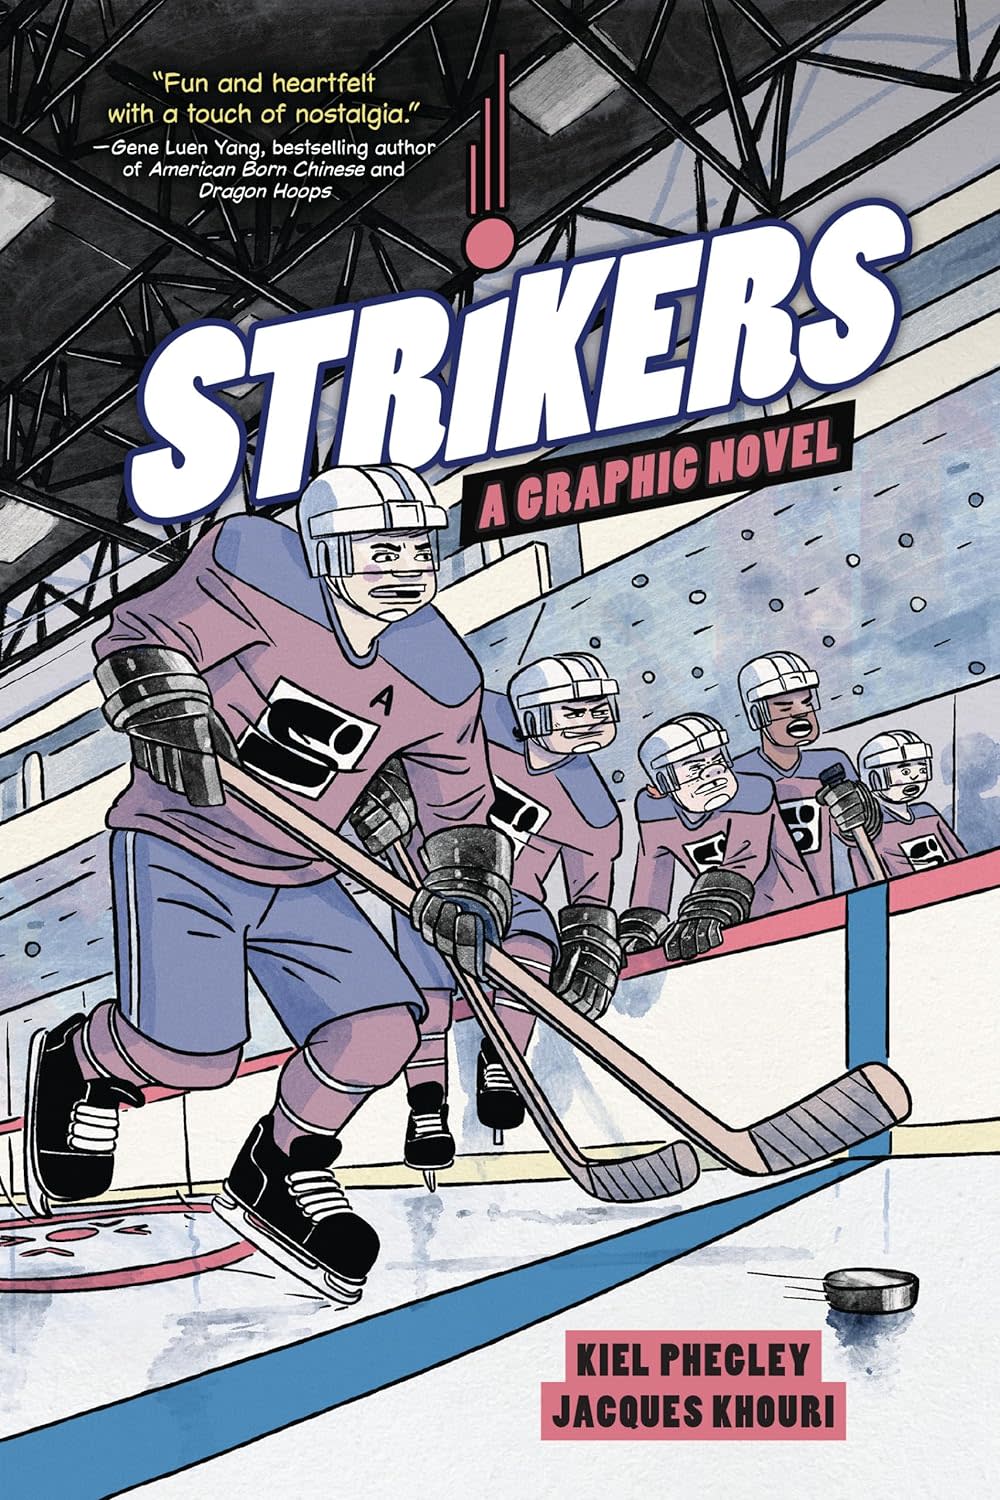 "Strikers: A Graphic Novel"